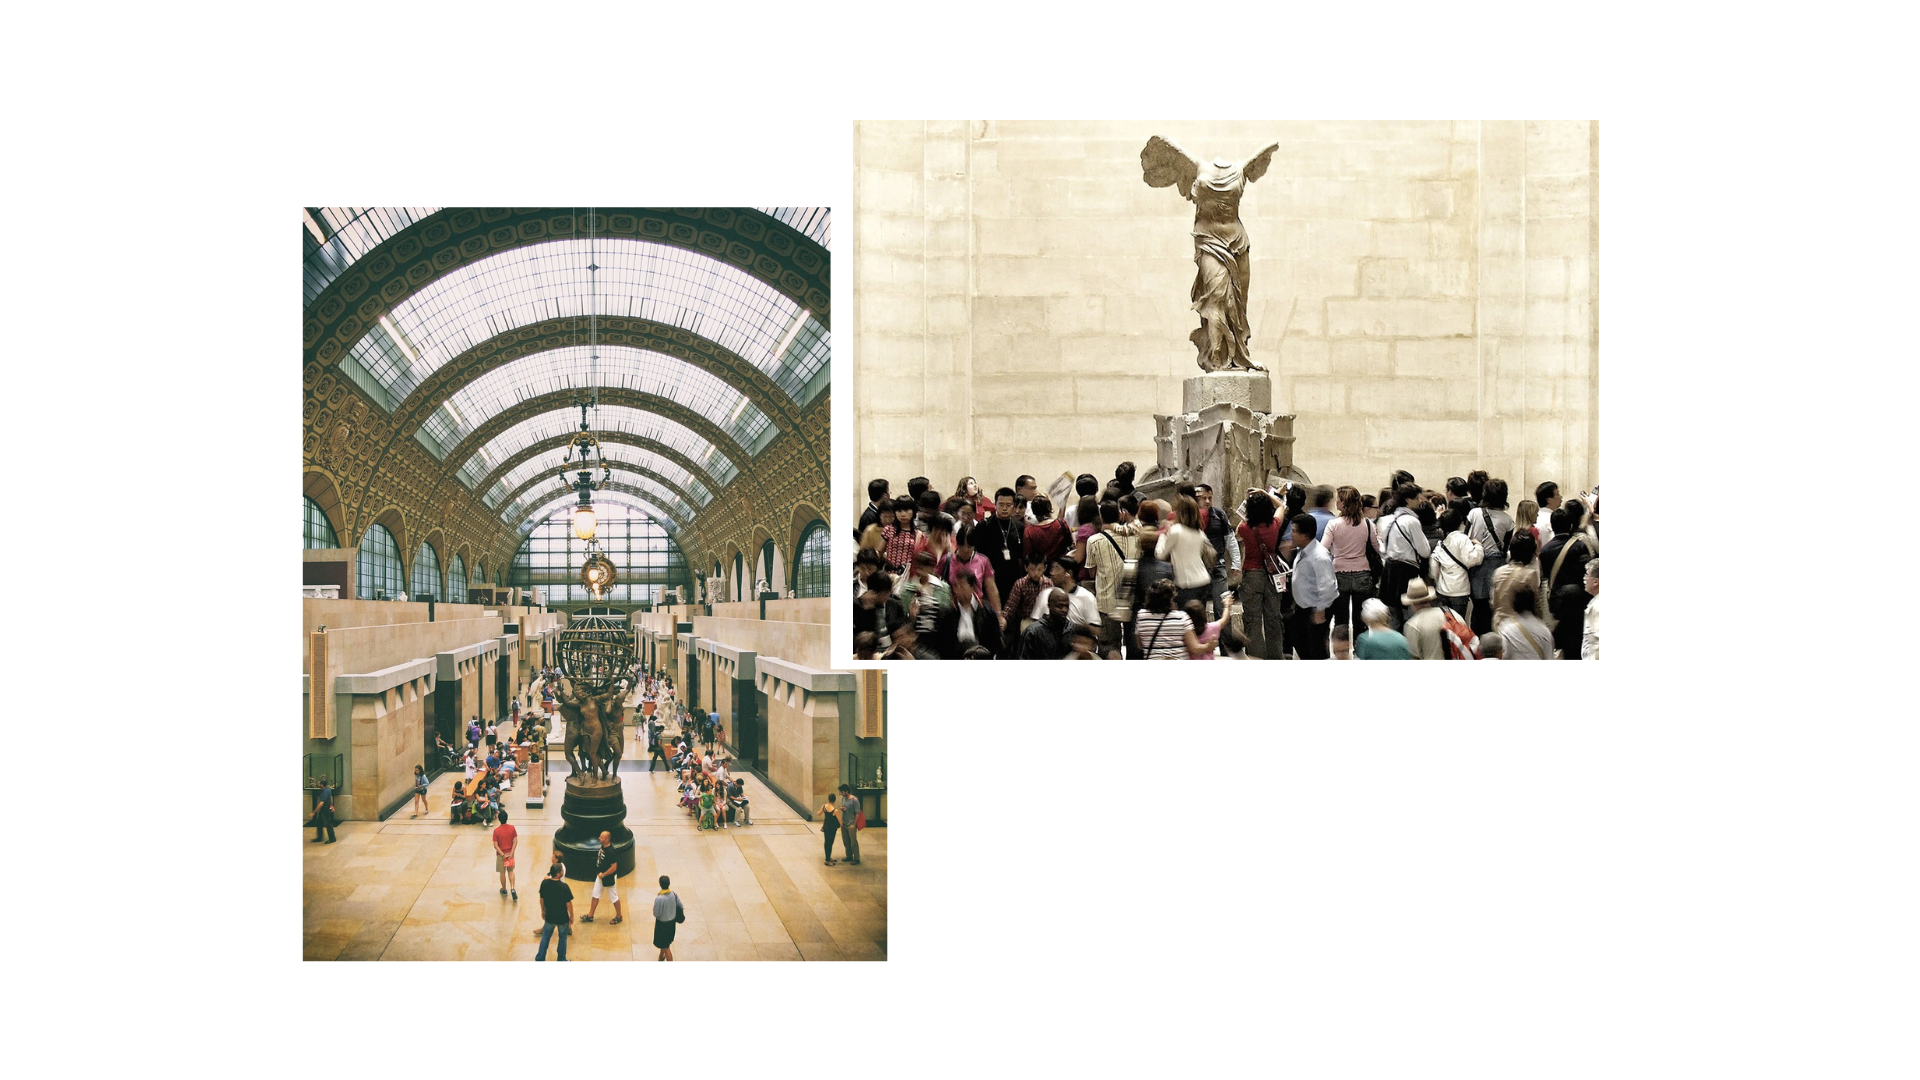 JUNE: reopening of museums, Le Marais at the heart of the summer's cultural reopening